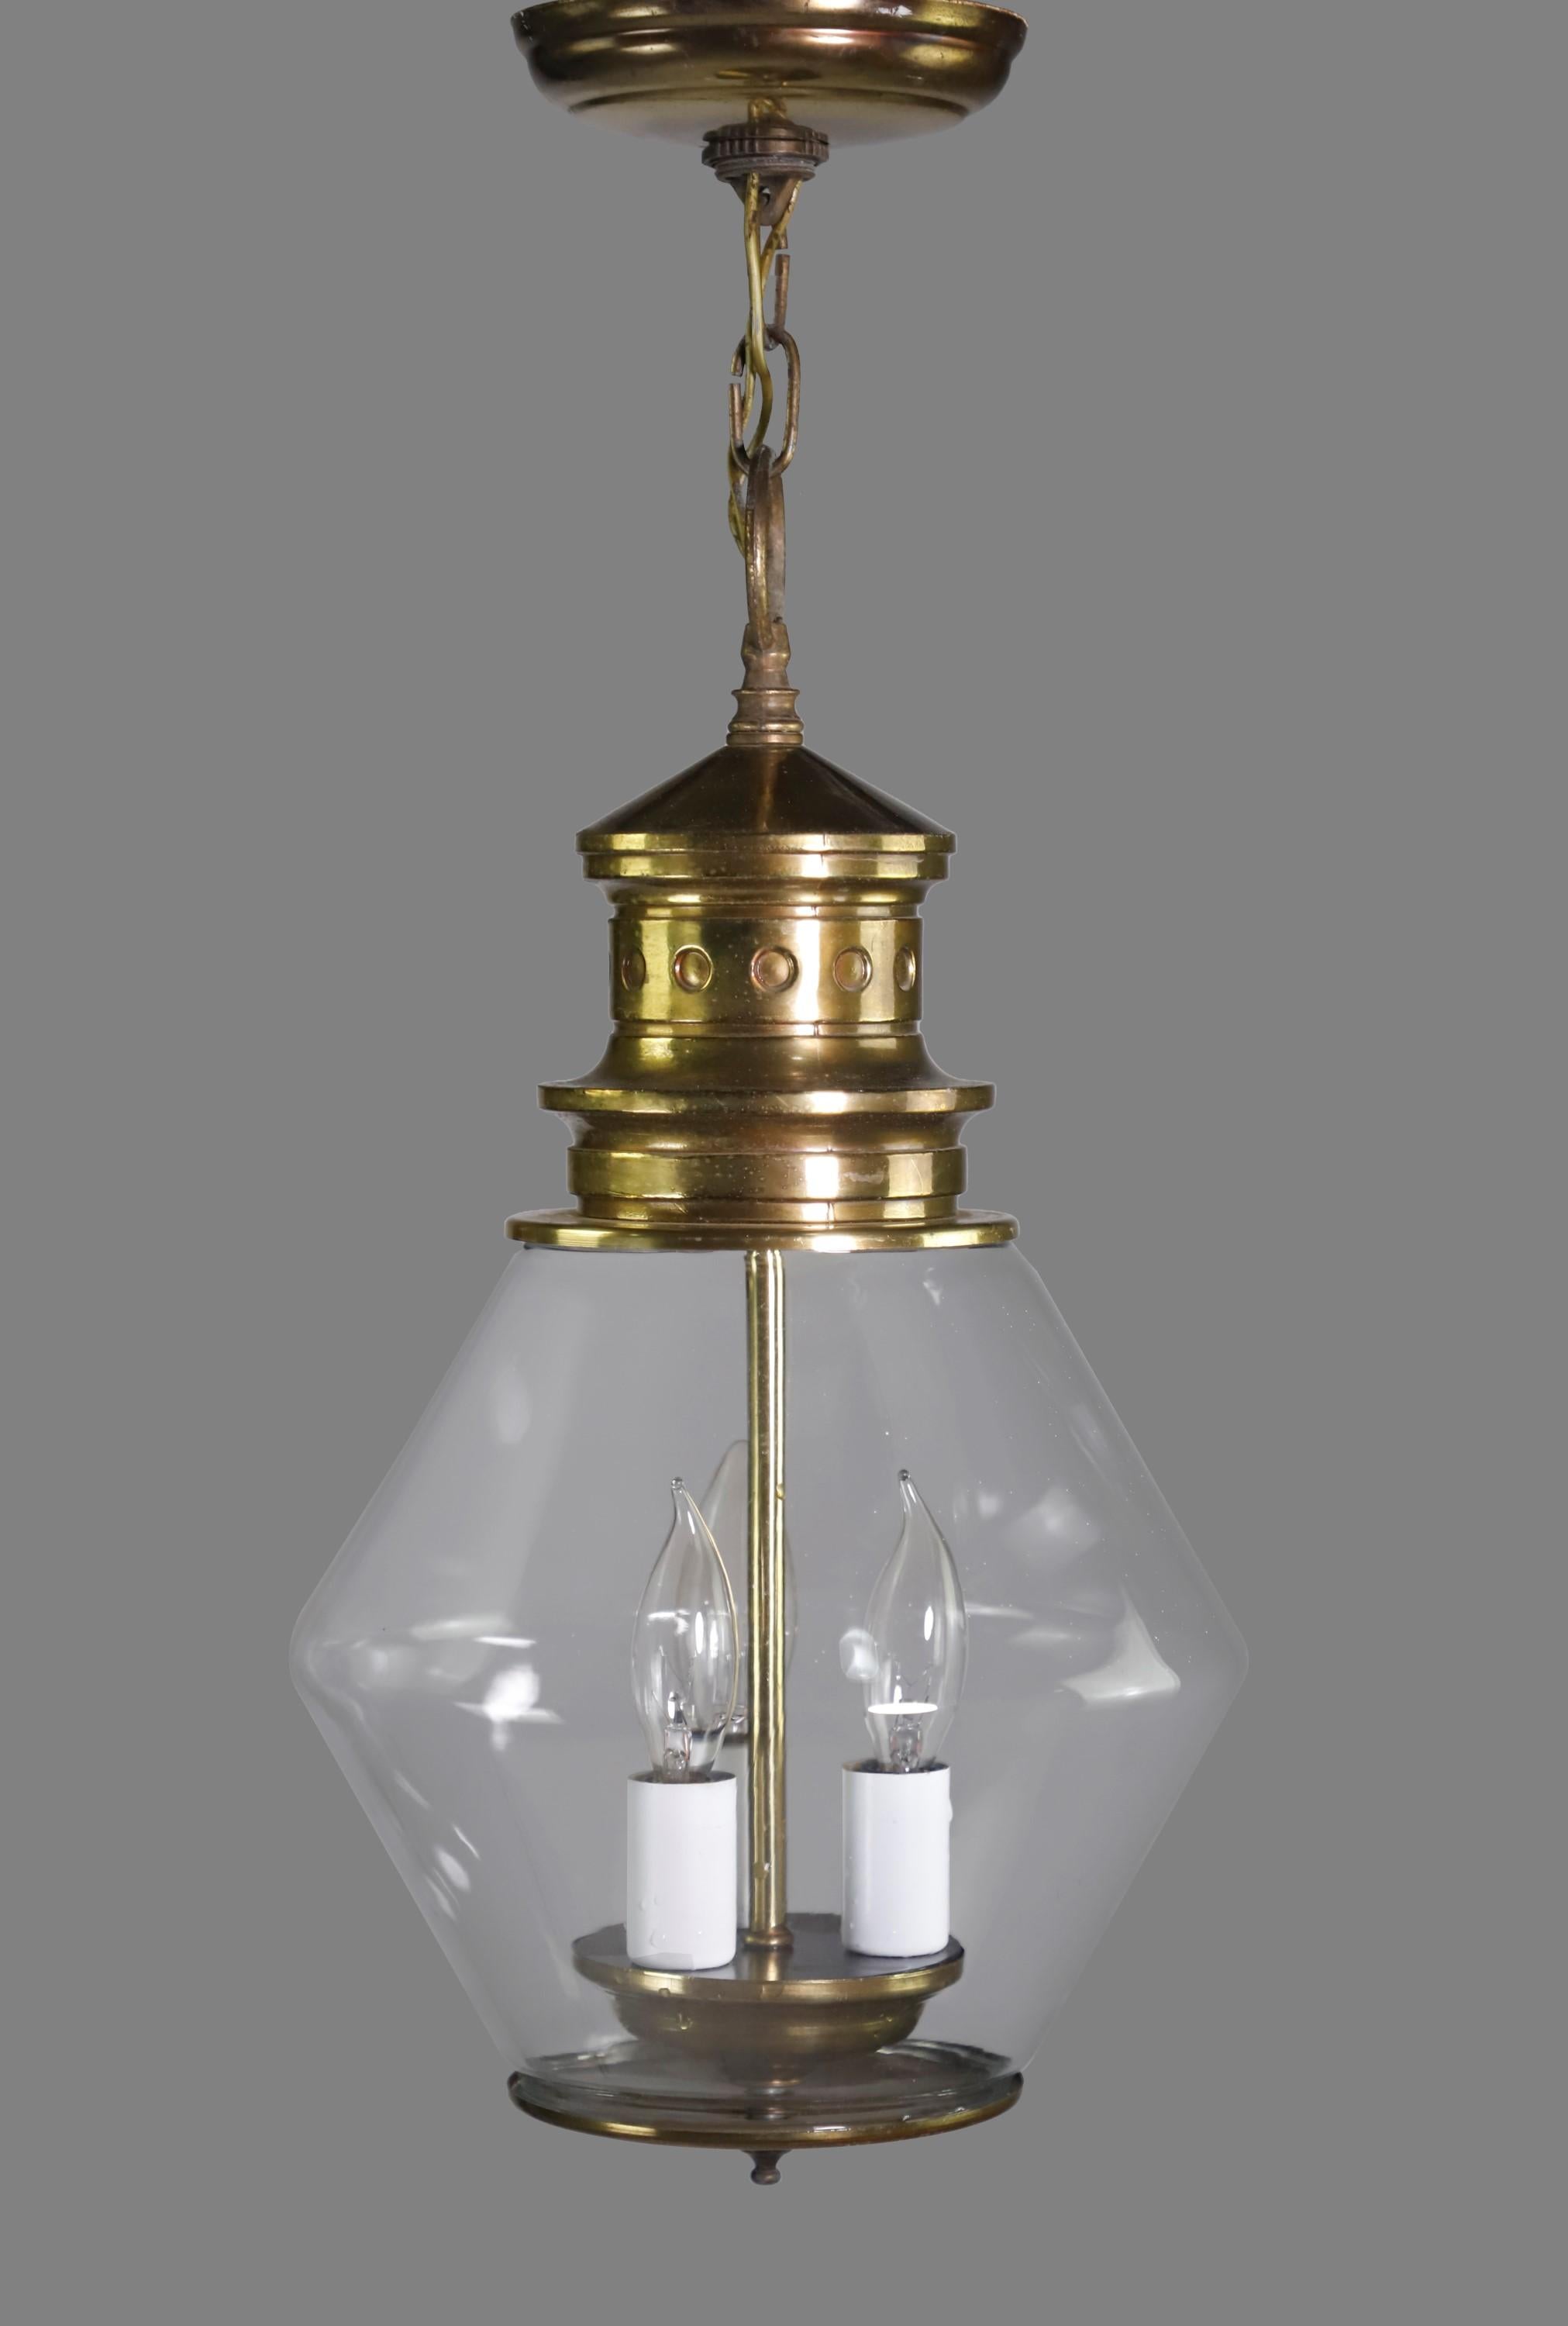 1930s Railroad style brass pendant light. The unusual clear shade is hand blown glass. The fixture itself is made from brass and features three candelabra light sockets. Cleaned and restored. Please note, this item is located in our Scranton, PA